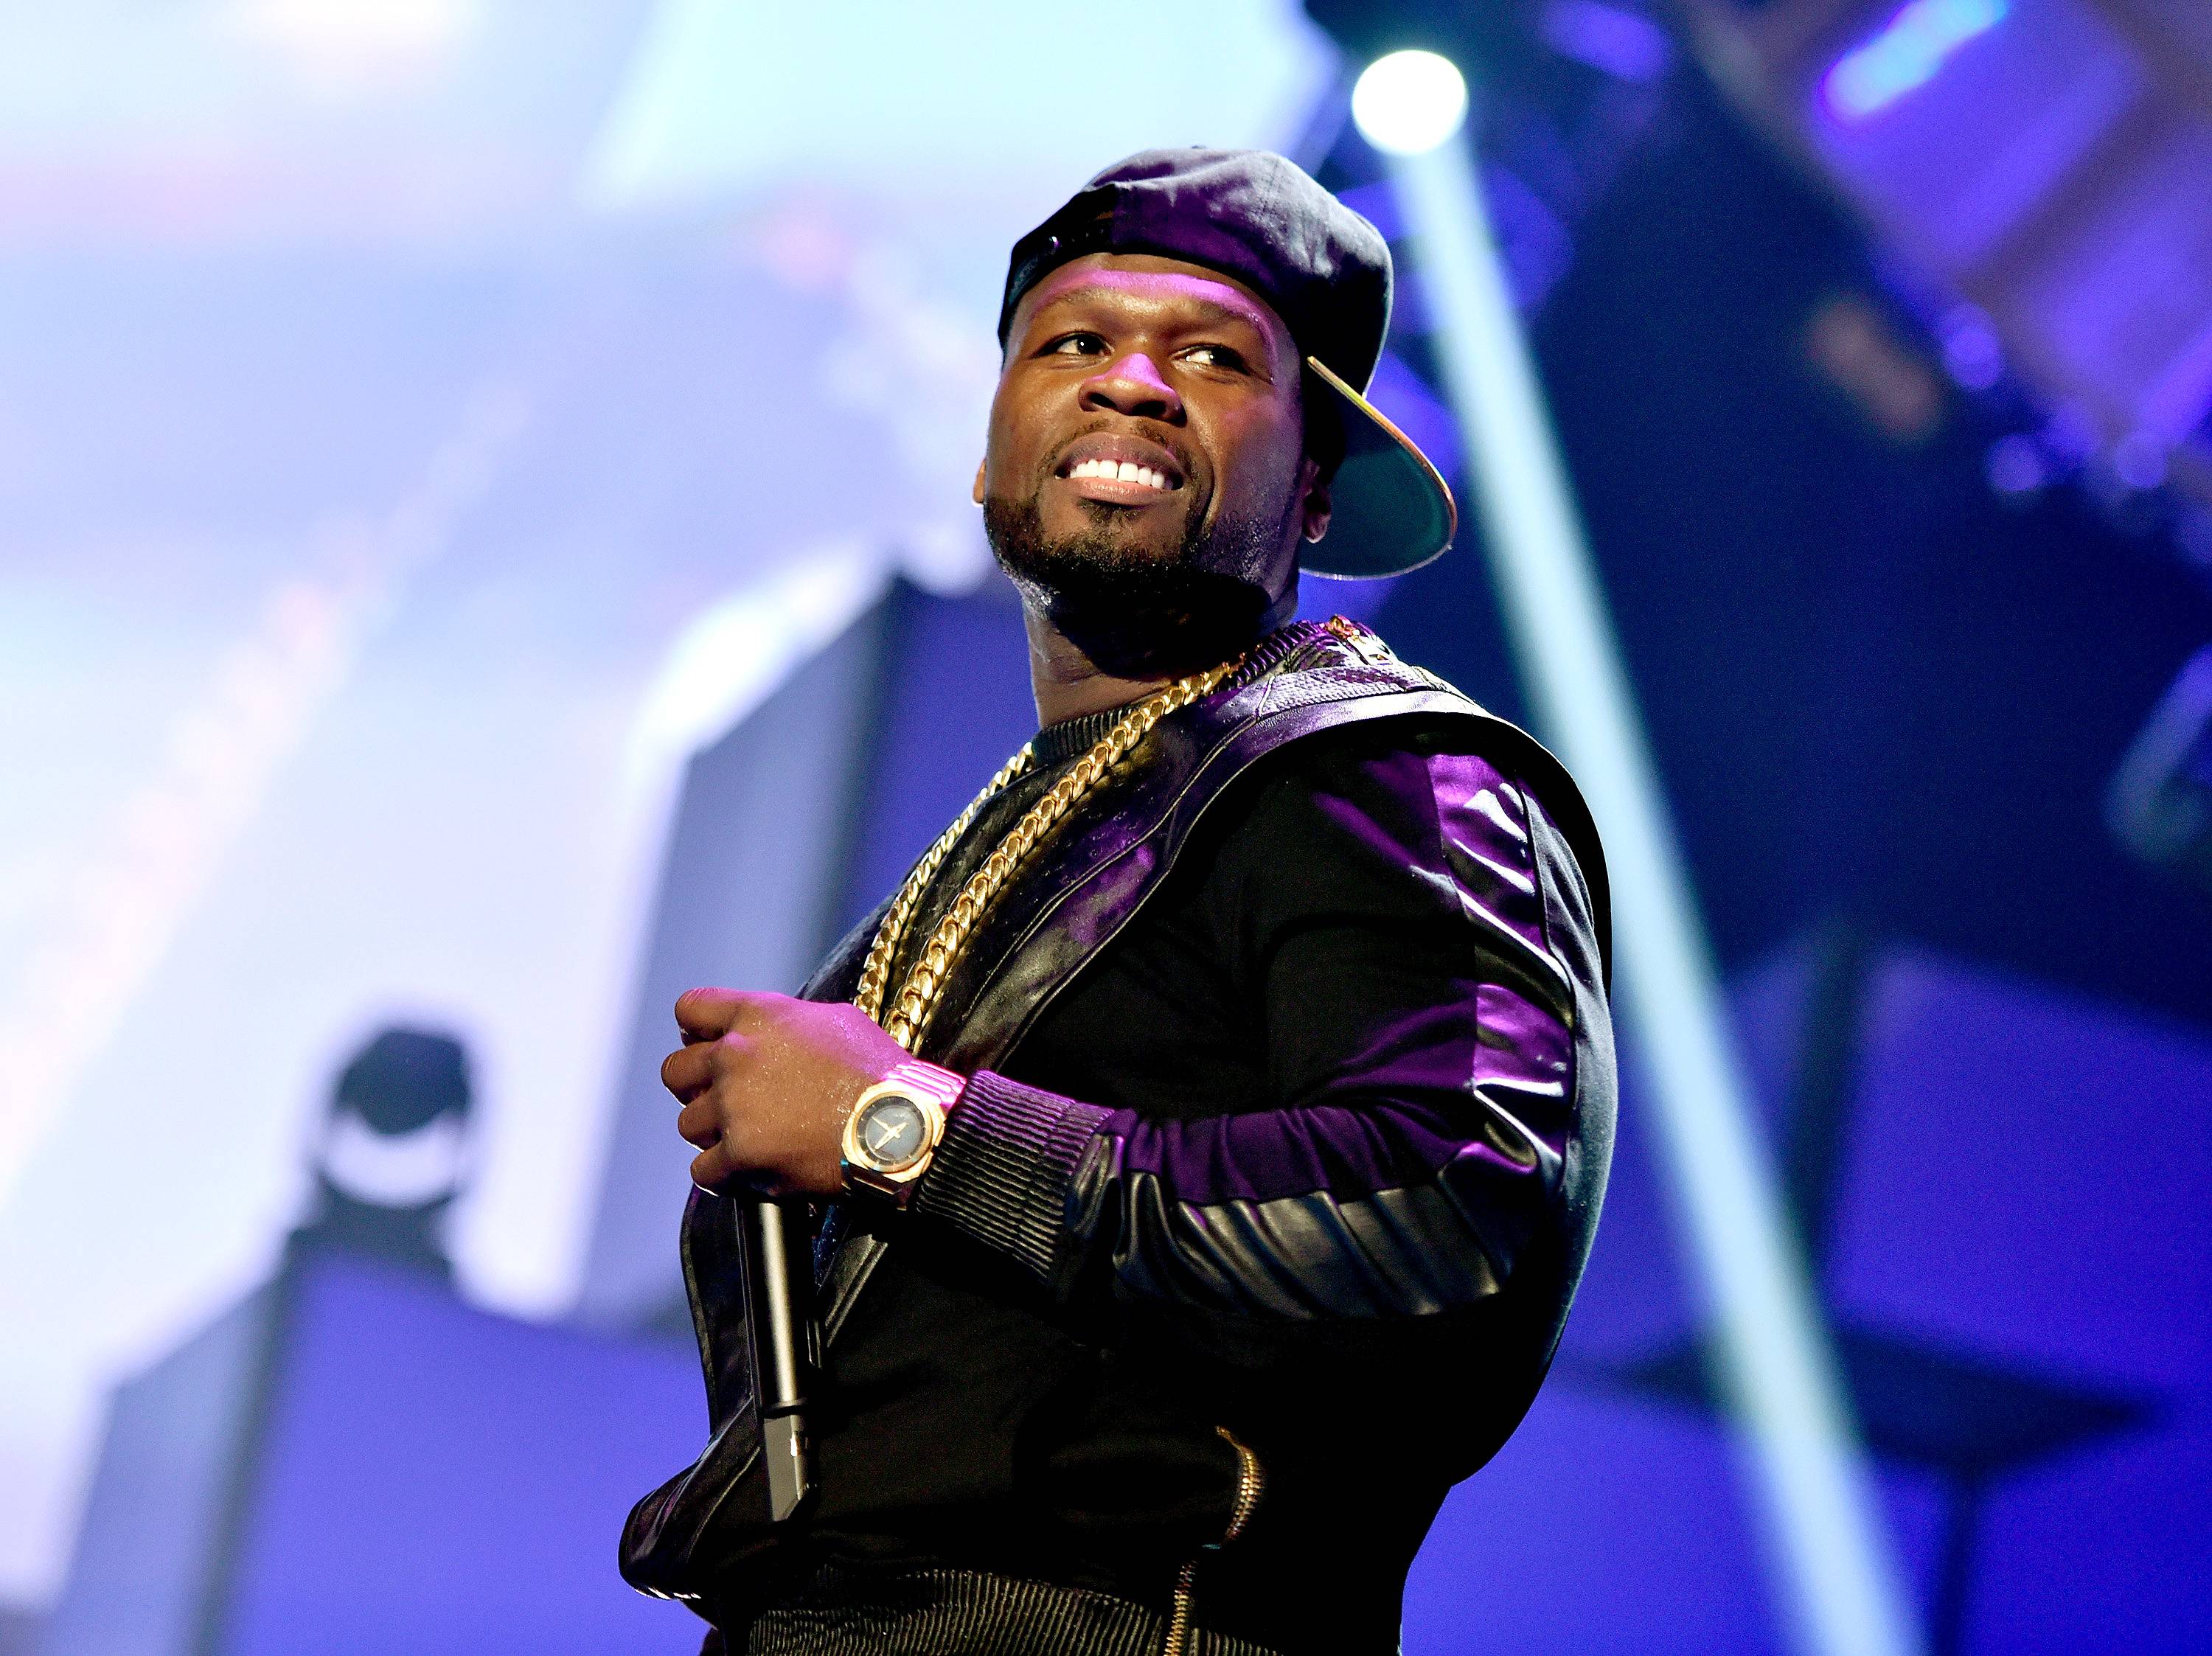 50 Cent loses in $32 million suit against former lawyers